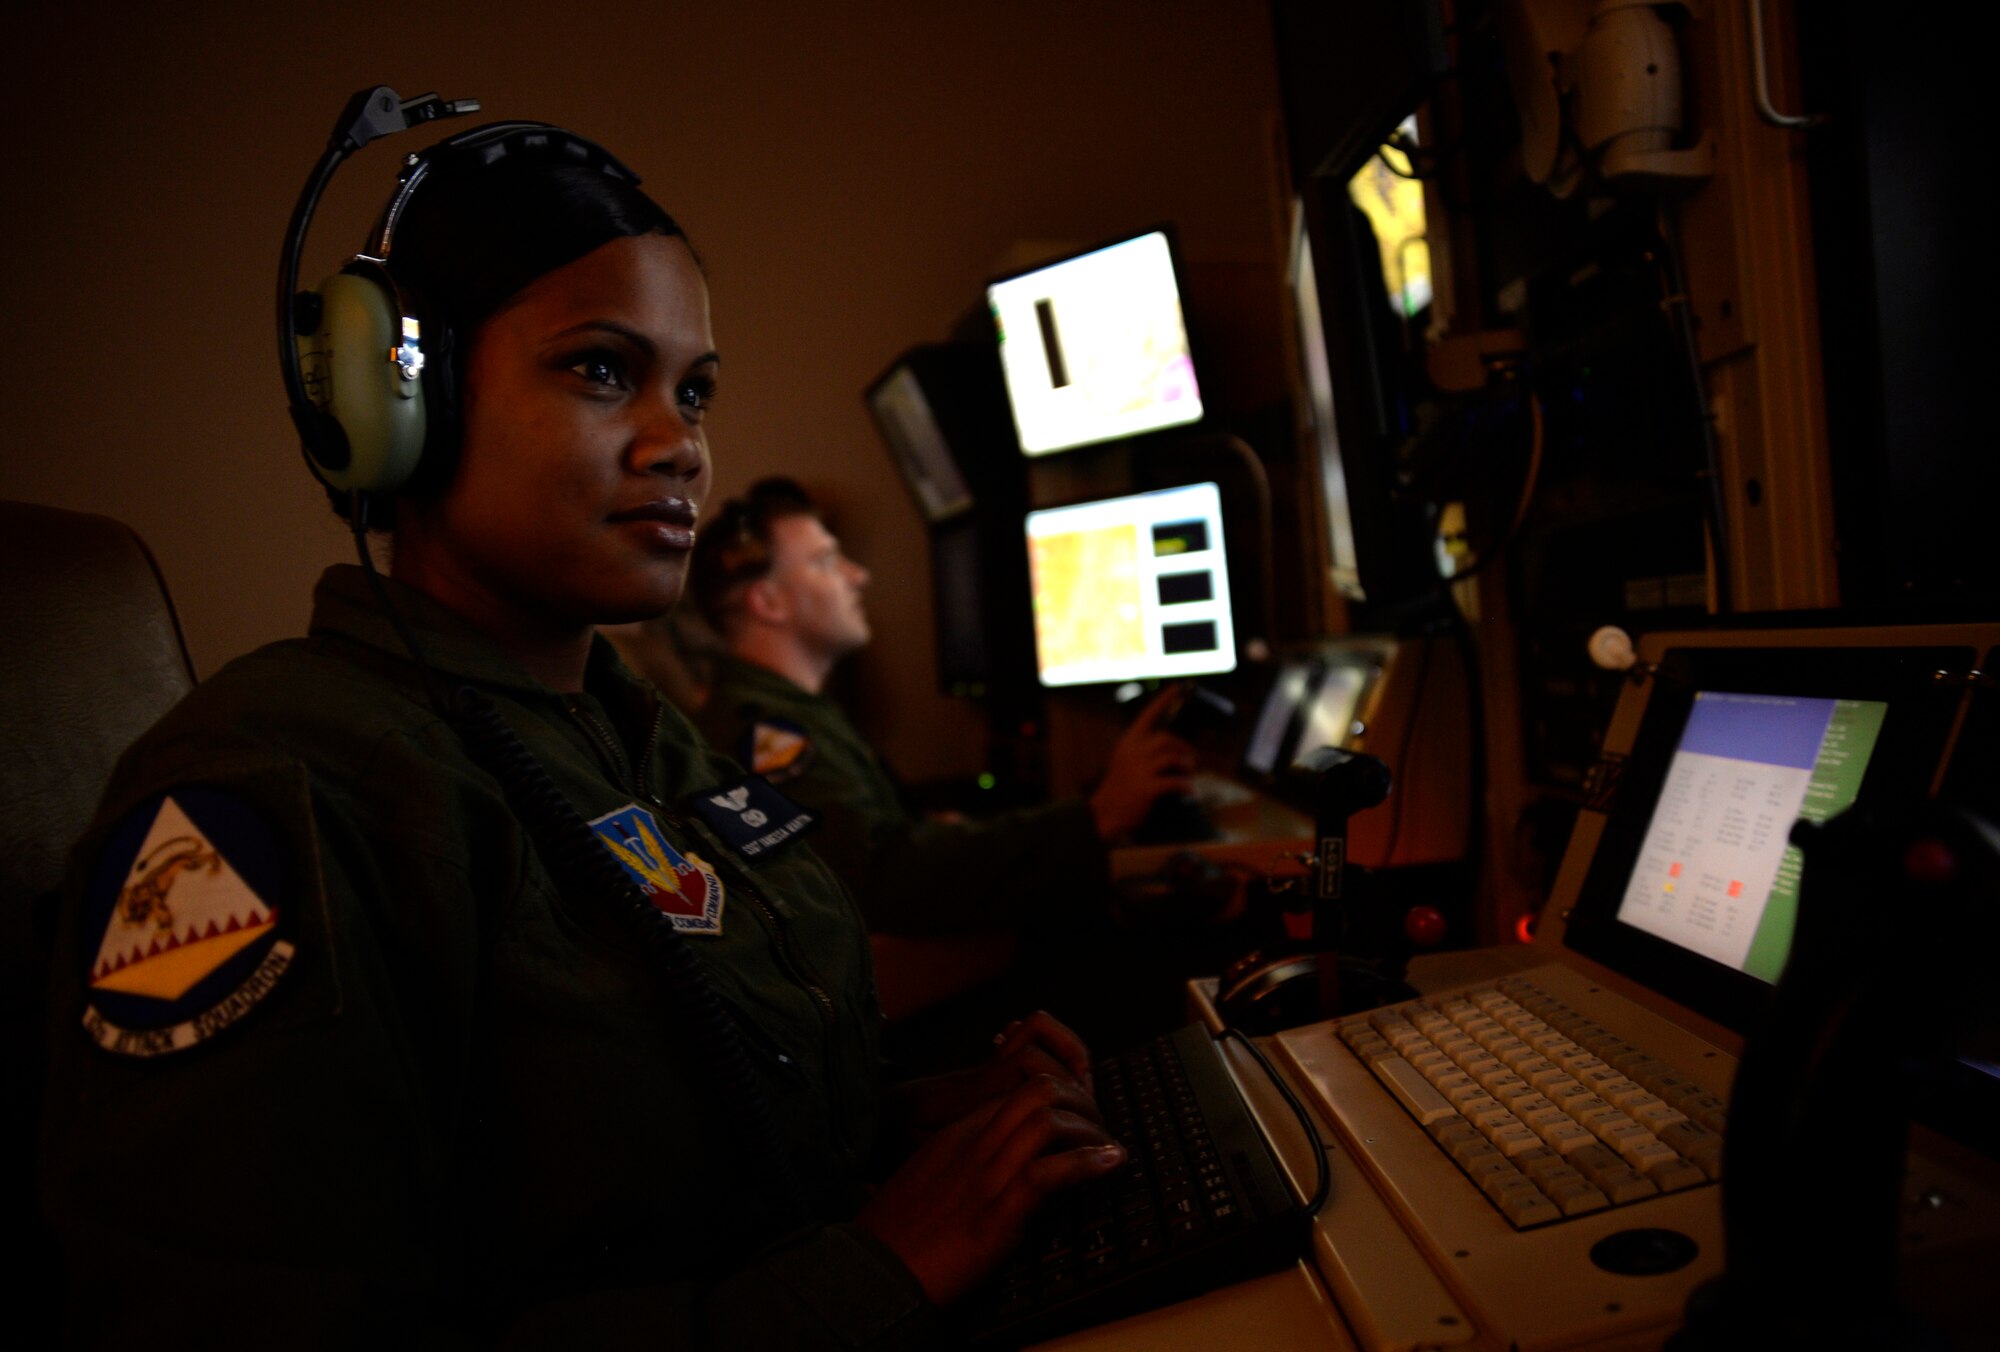 Staff Sgt. Vanessa, 42nd Attack Squadron sensor operator, front, and Capt. Andrew, 18th Reconnaissance Squadron pilot, follow a vehicle with a remotely piloted aircraft in a flight training simulator May 28, 2014. The two person crew was selected to fly the 65th air combat patrol, an initiative set by then Secretary of Defense Robert Gates Dec. 23, 2009 (Last names have been withheld for security purposes). (U.S. Air Force photo by Staff Sgt. Adawn Kelsey/Released)